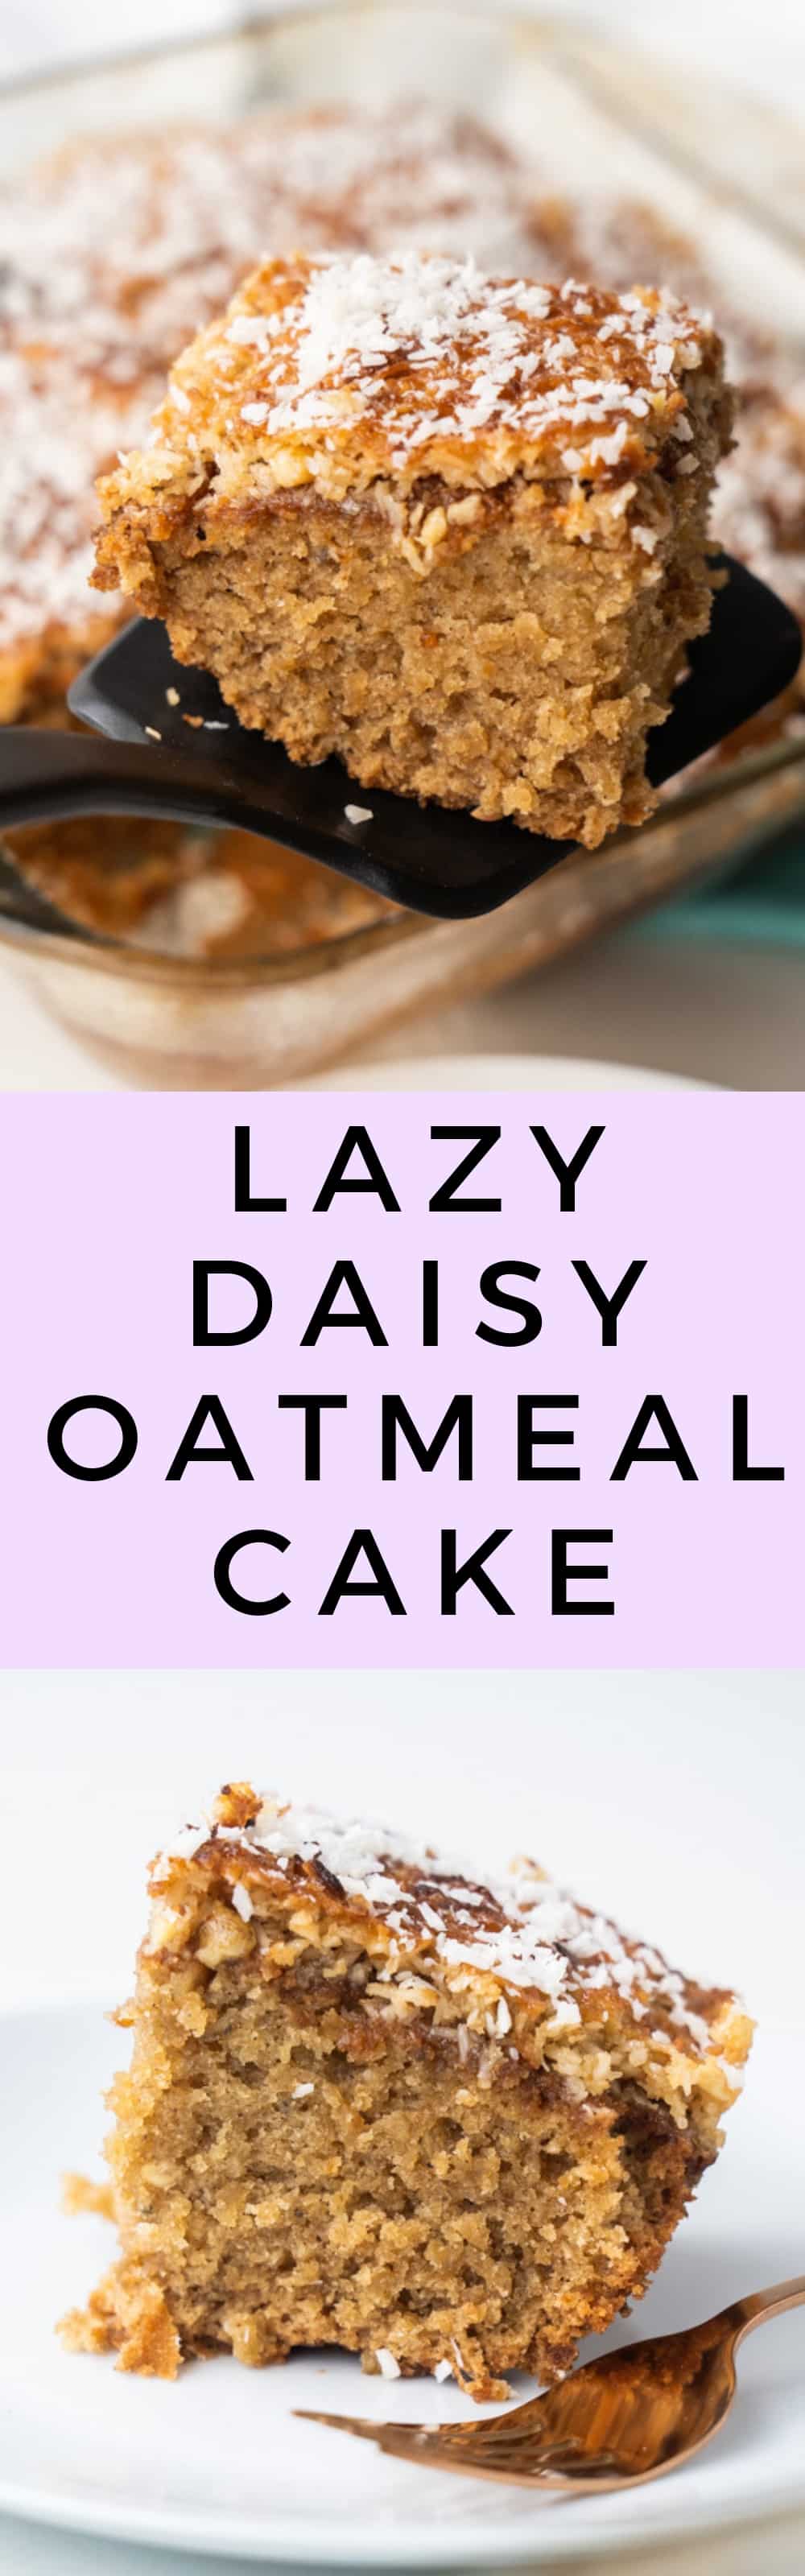 This Lazy Daisy Oatmeal Cake is an easy old fashioned recipe, like a delicious dessert your grandma might have made you growing up. The oats are soaked in boiling water to soften them up perfectly, so every bite is moist and irresistible.